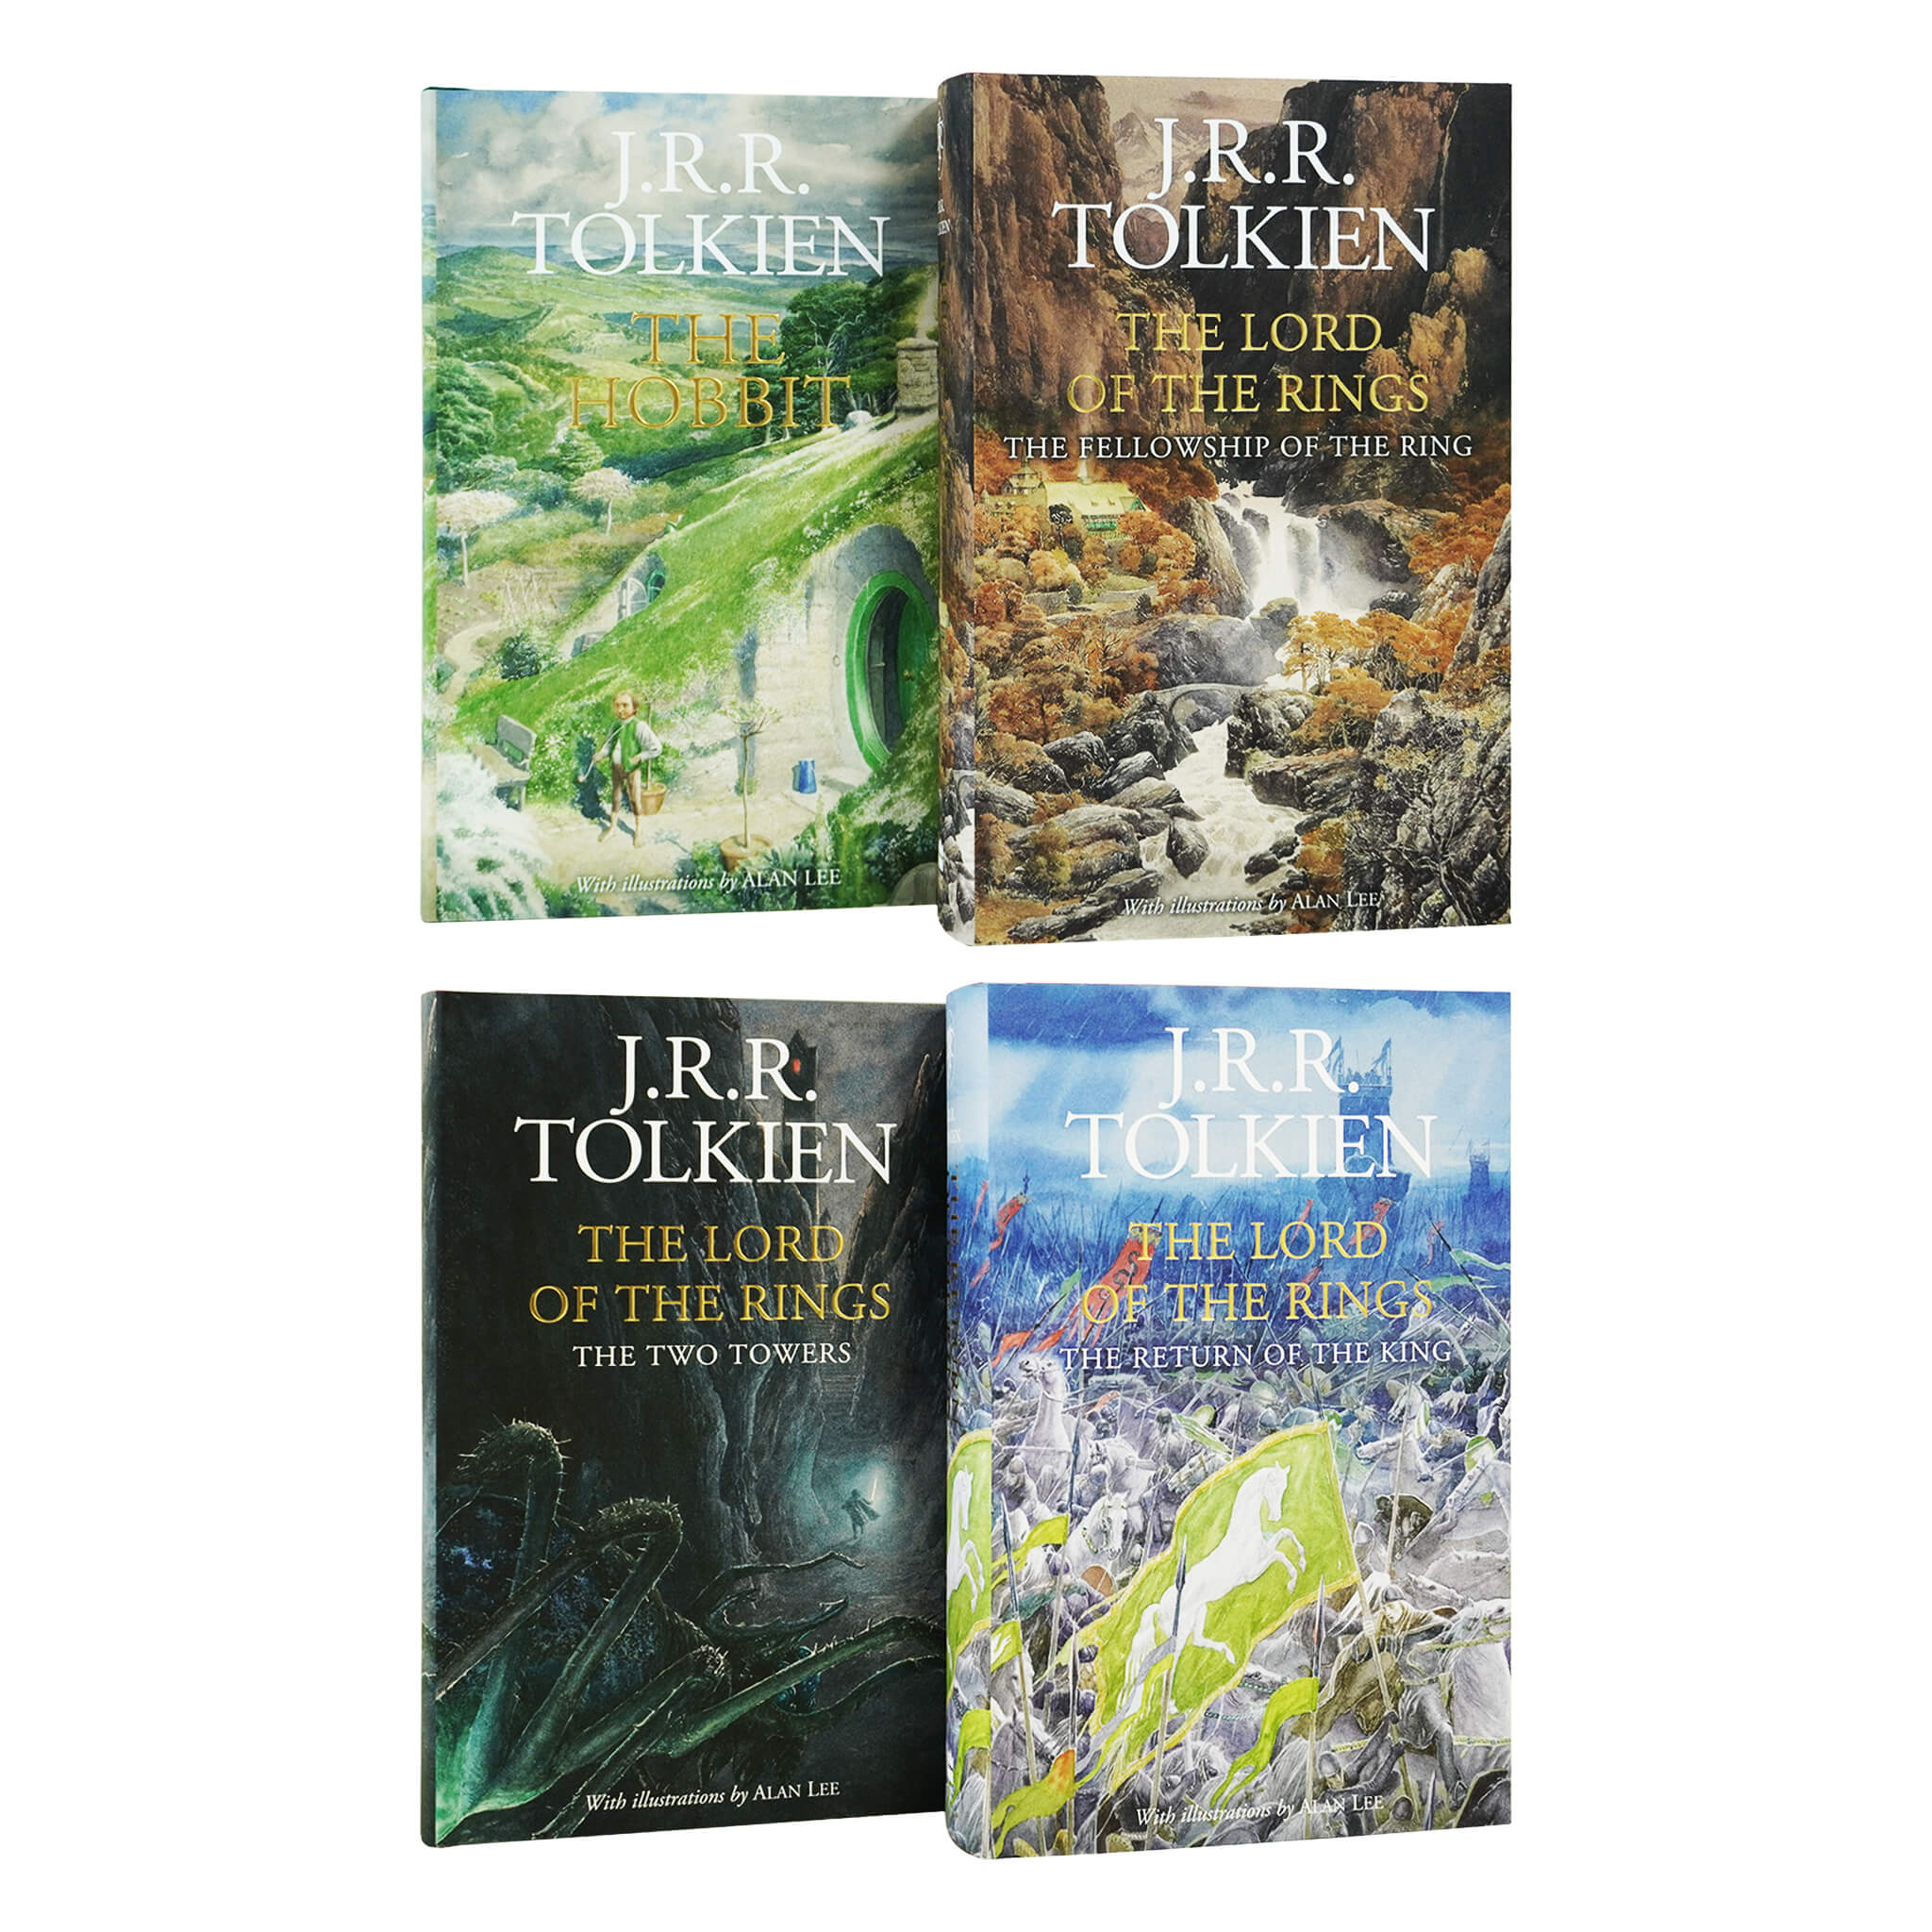 The Hobbit & The Lord of the Rings by J.R.R. Tolkien 4 Books Box Set - Fiction - Hardback